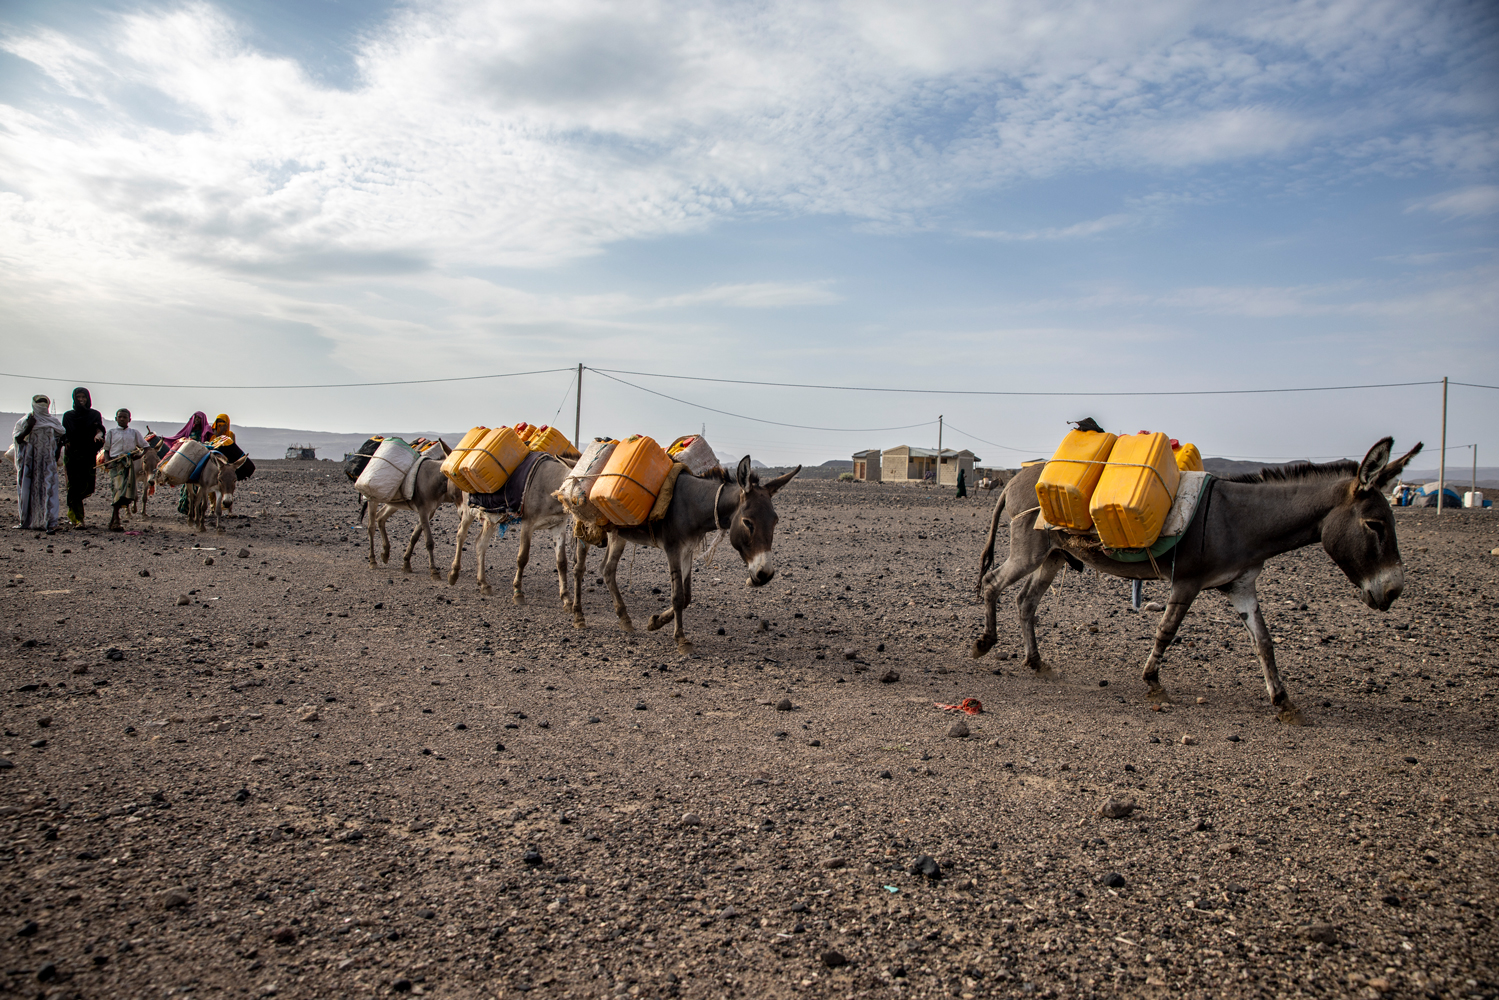 mules carrying buckets of water on their back.